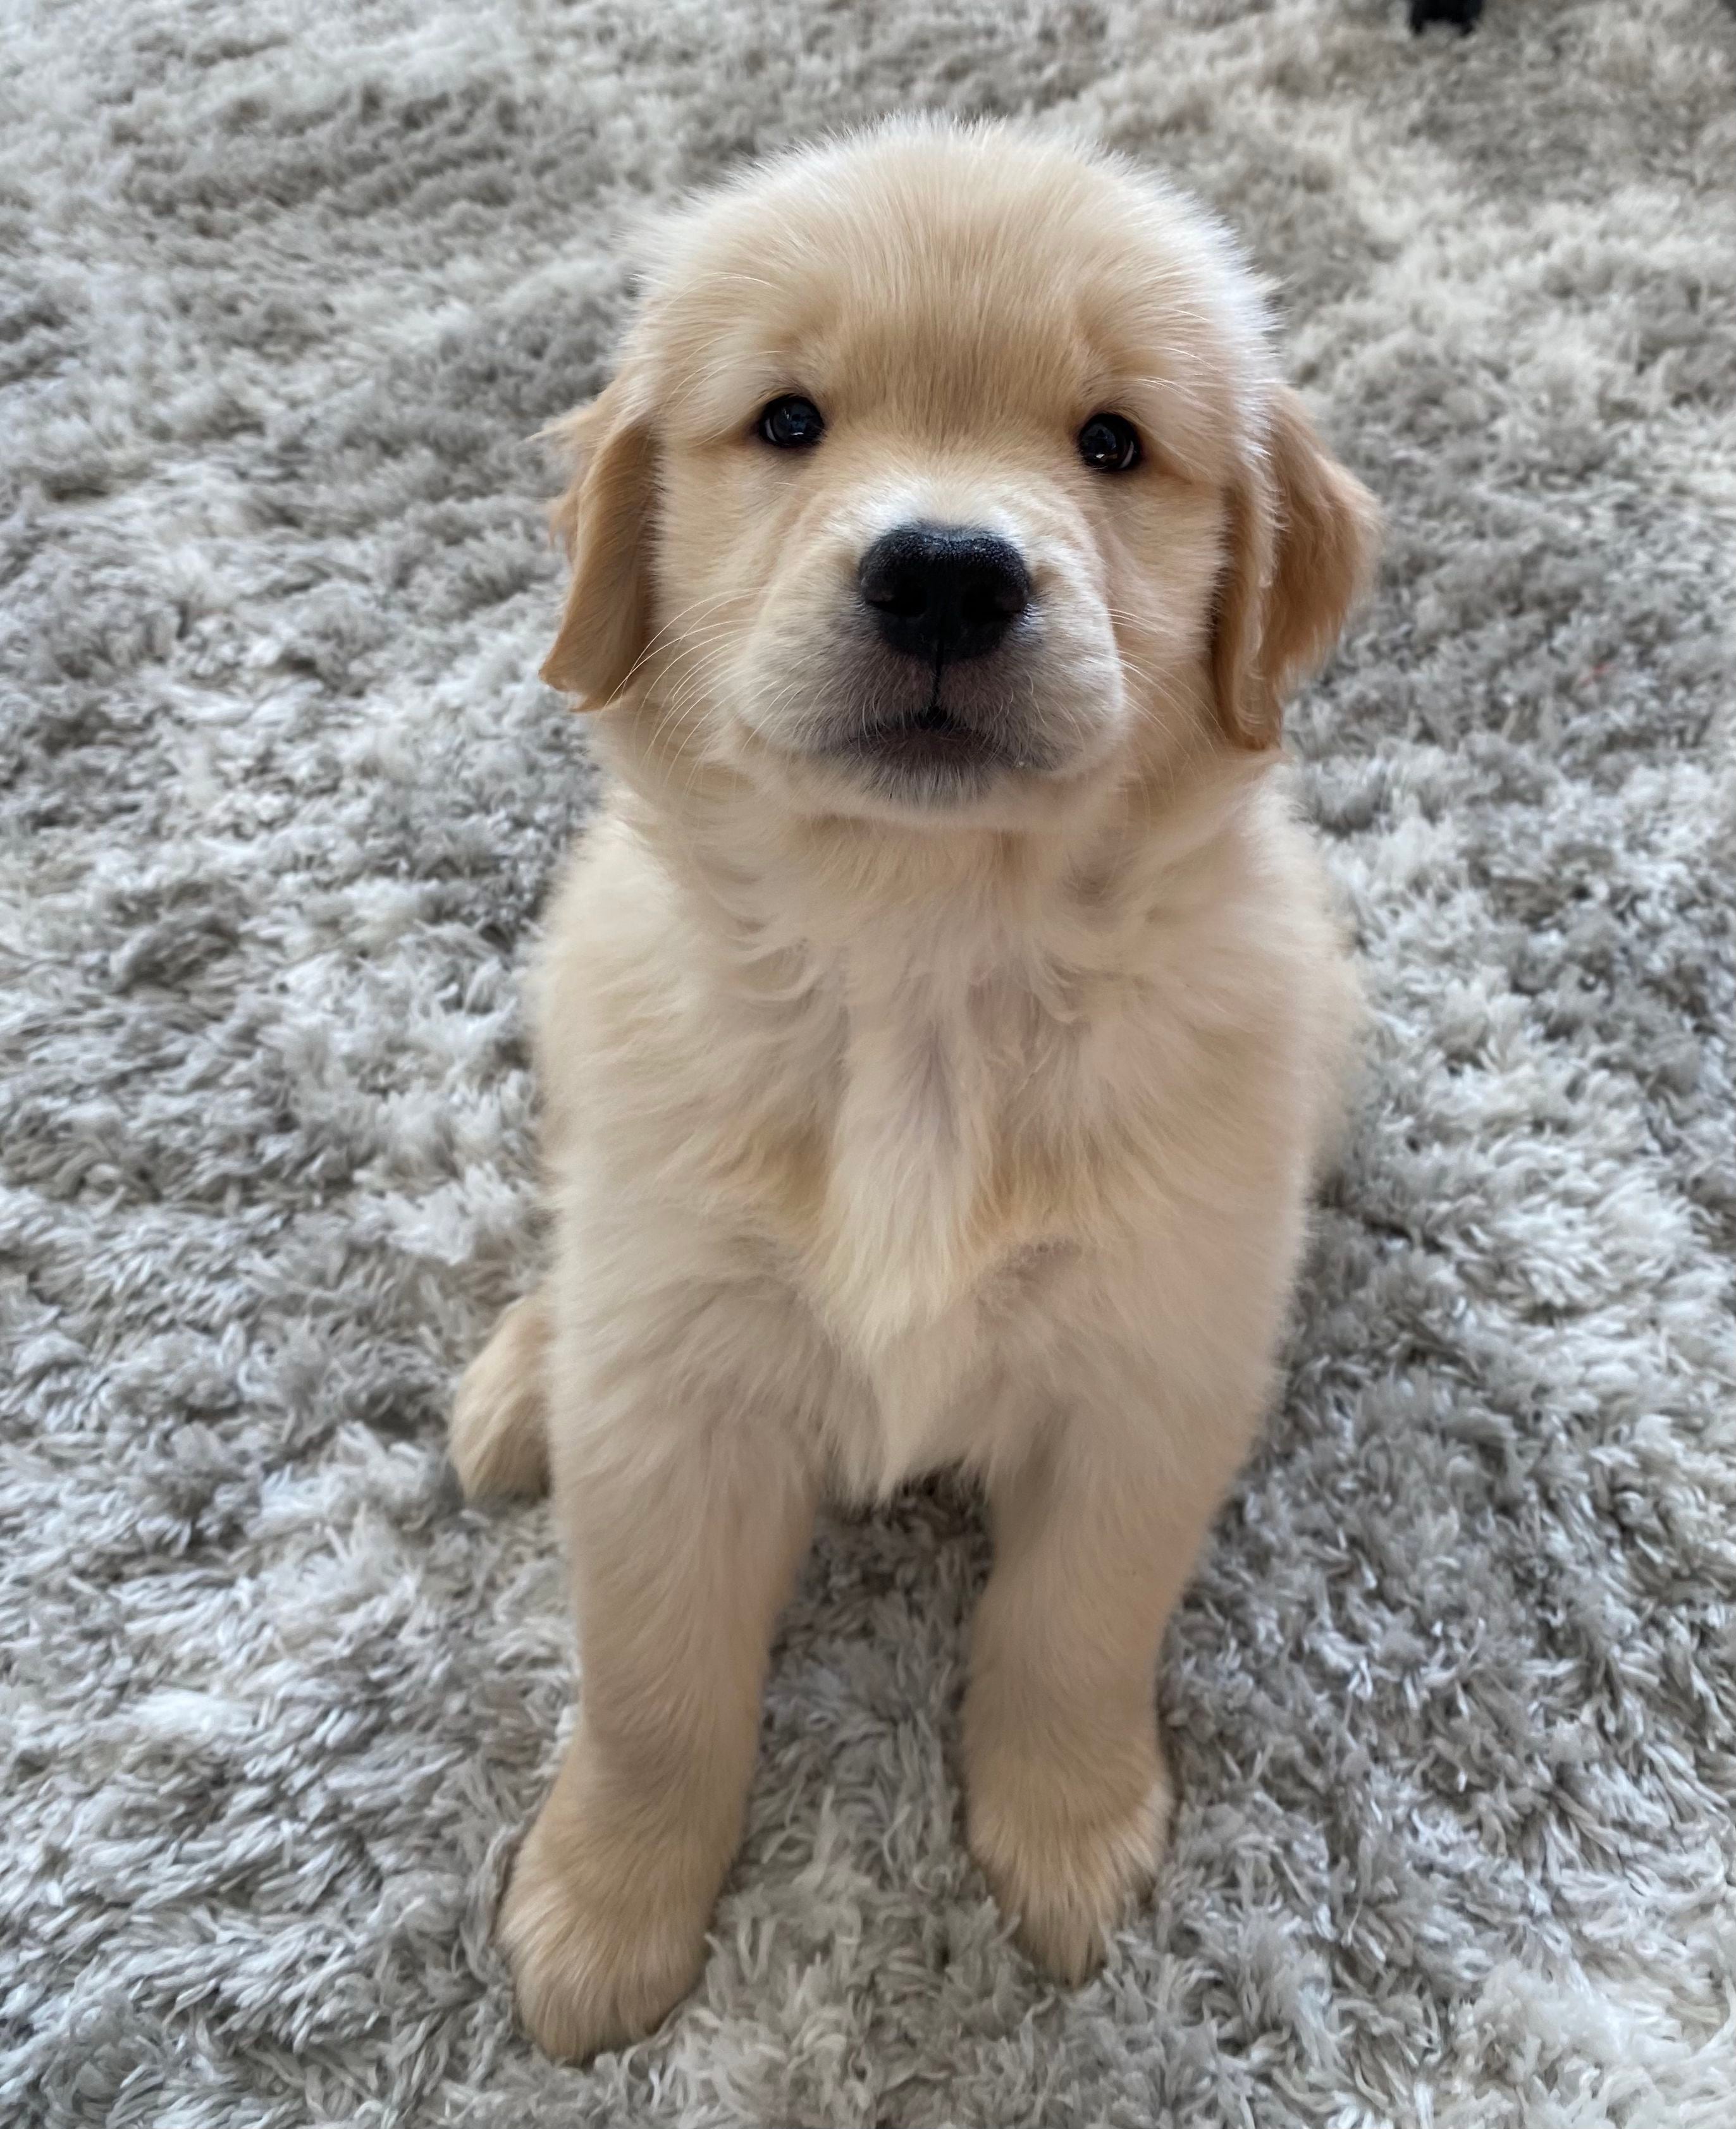 Philadelphia Flyers' Ivan Provorov's puppy Drake is Instagram and